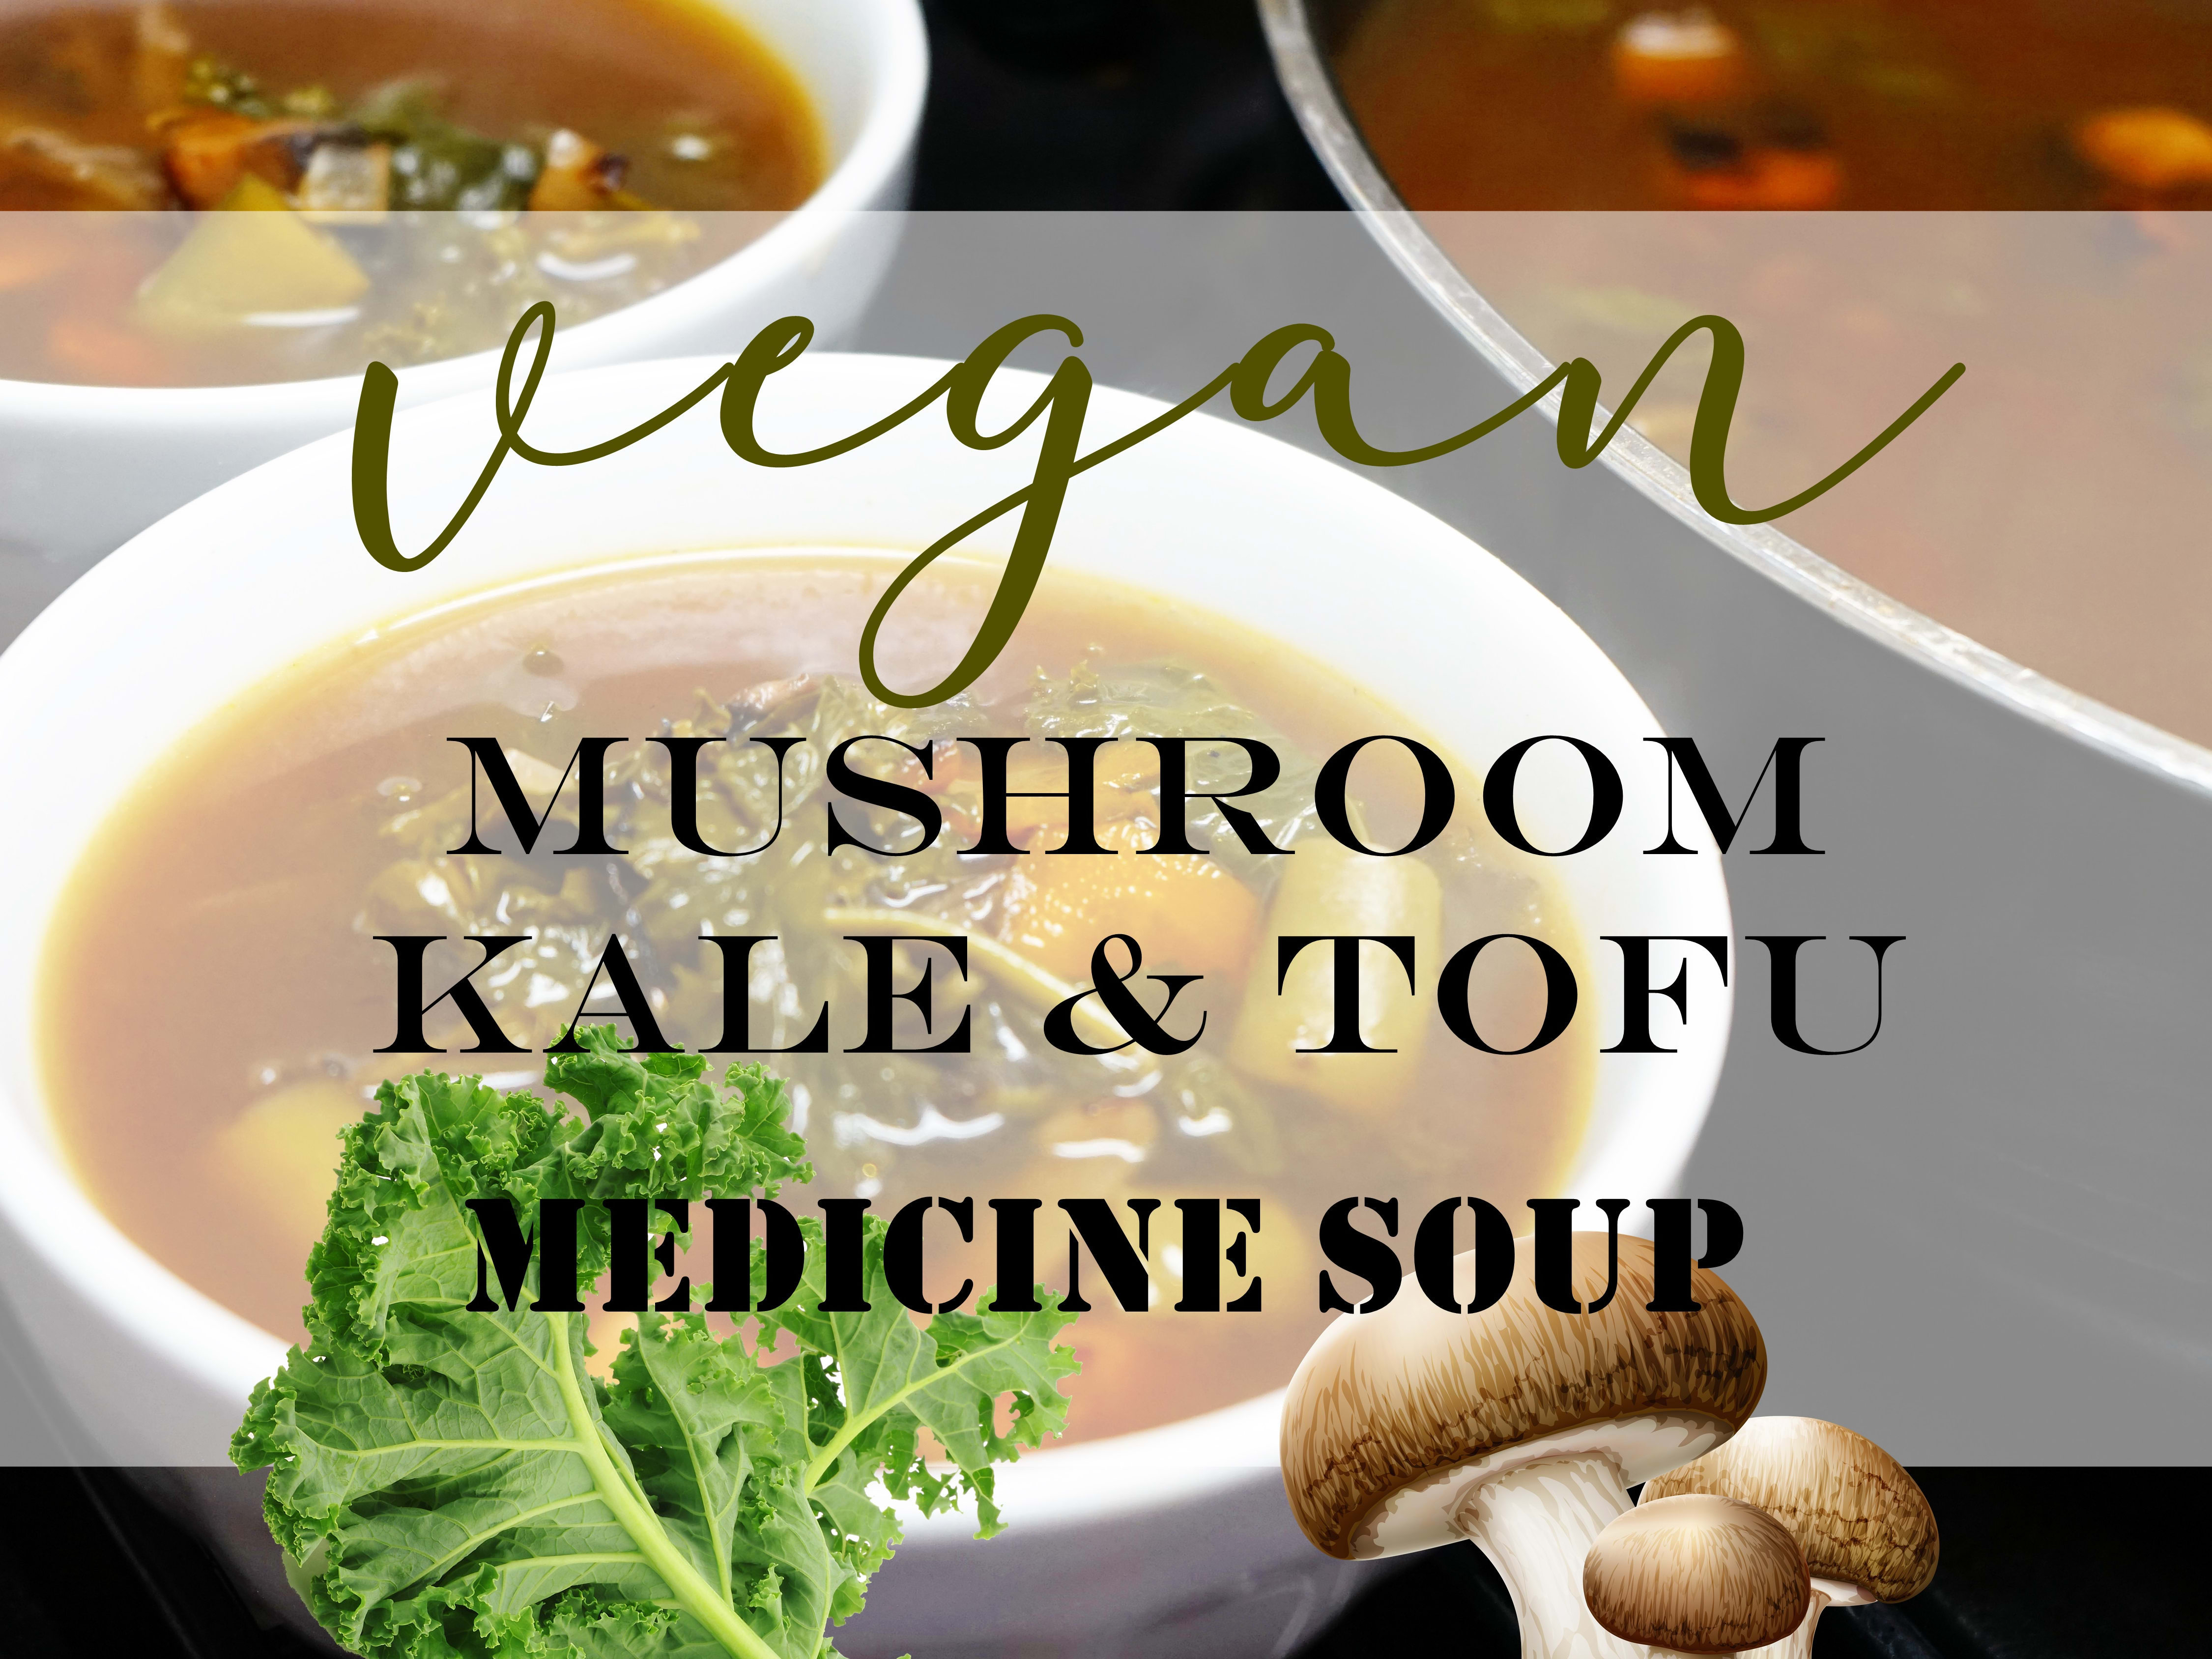 Vegan Chicken Noodle Soup (With Tofu, Kale and Mushrooms)! - PlantYou